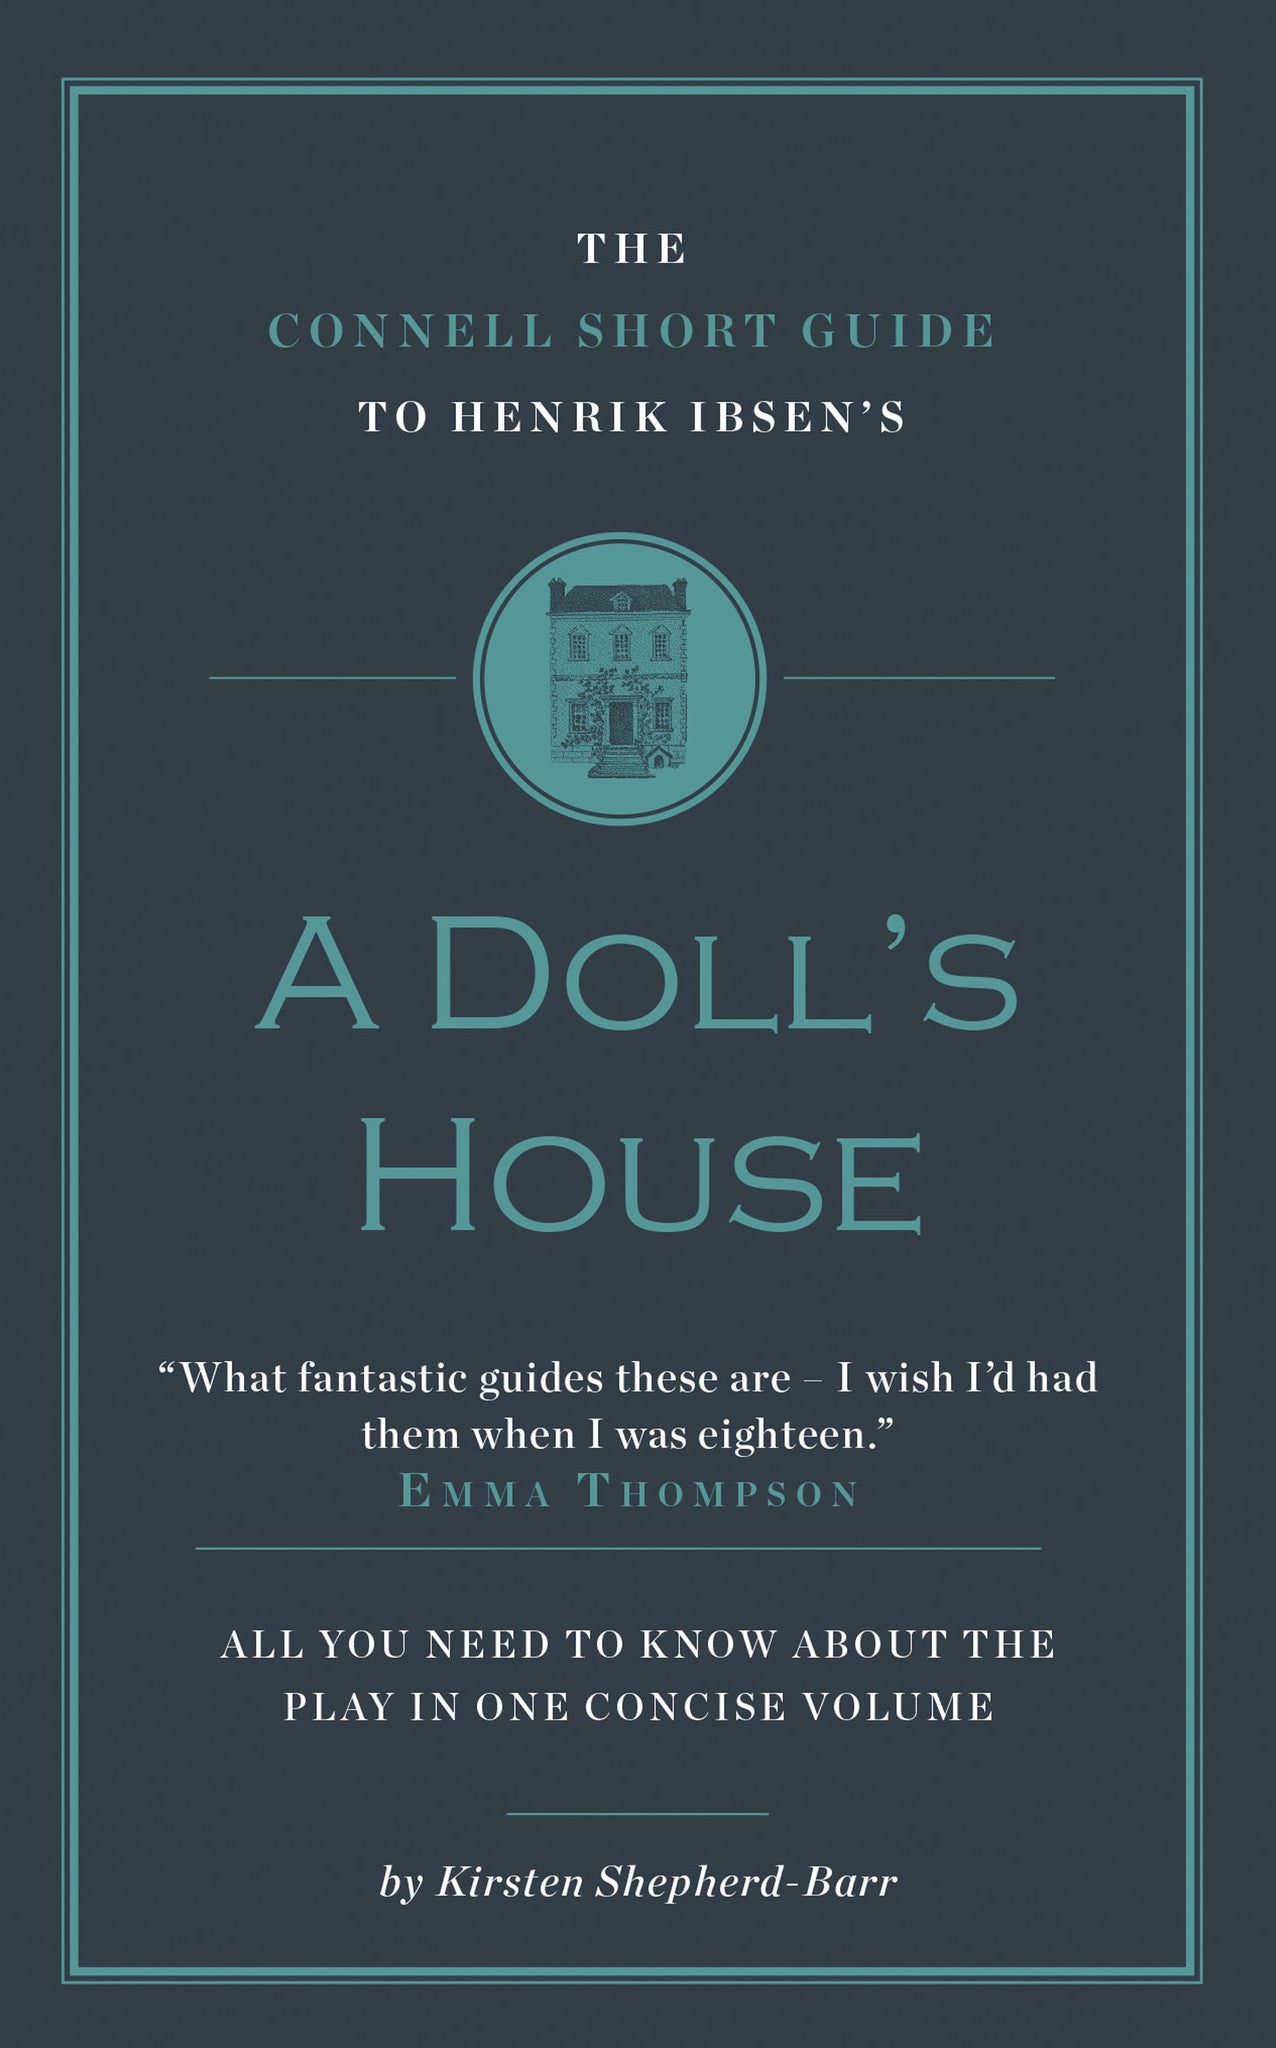 a doll's house story by henrik ibsen